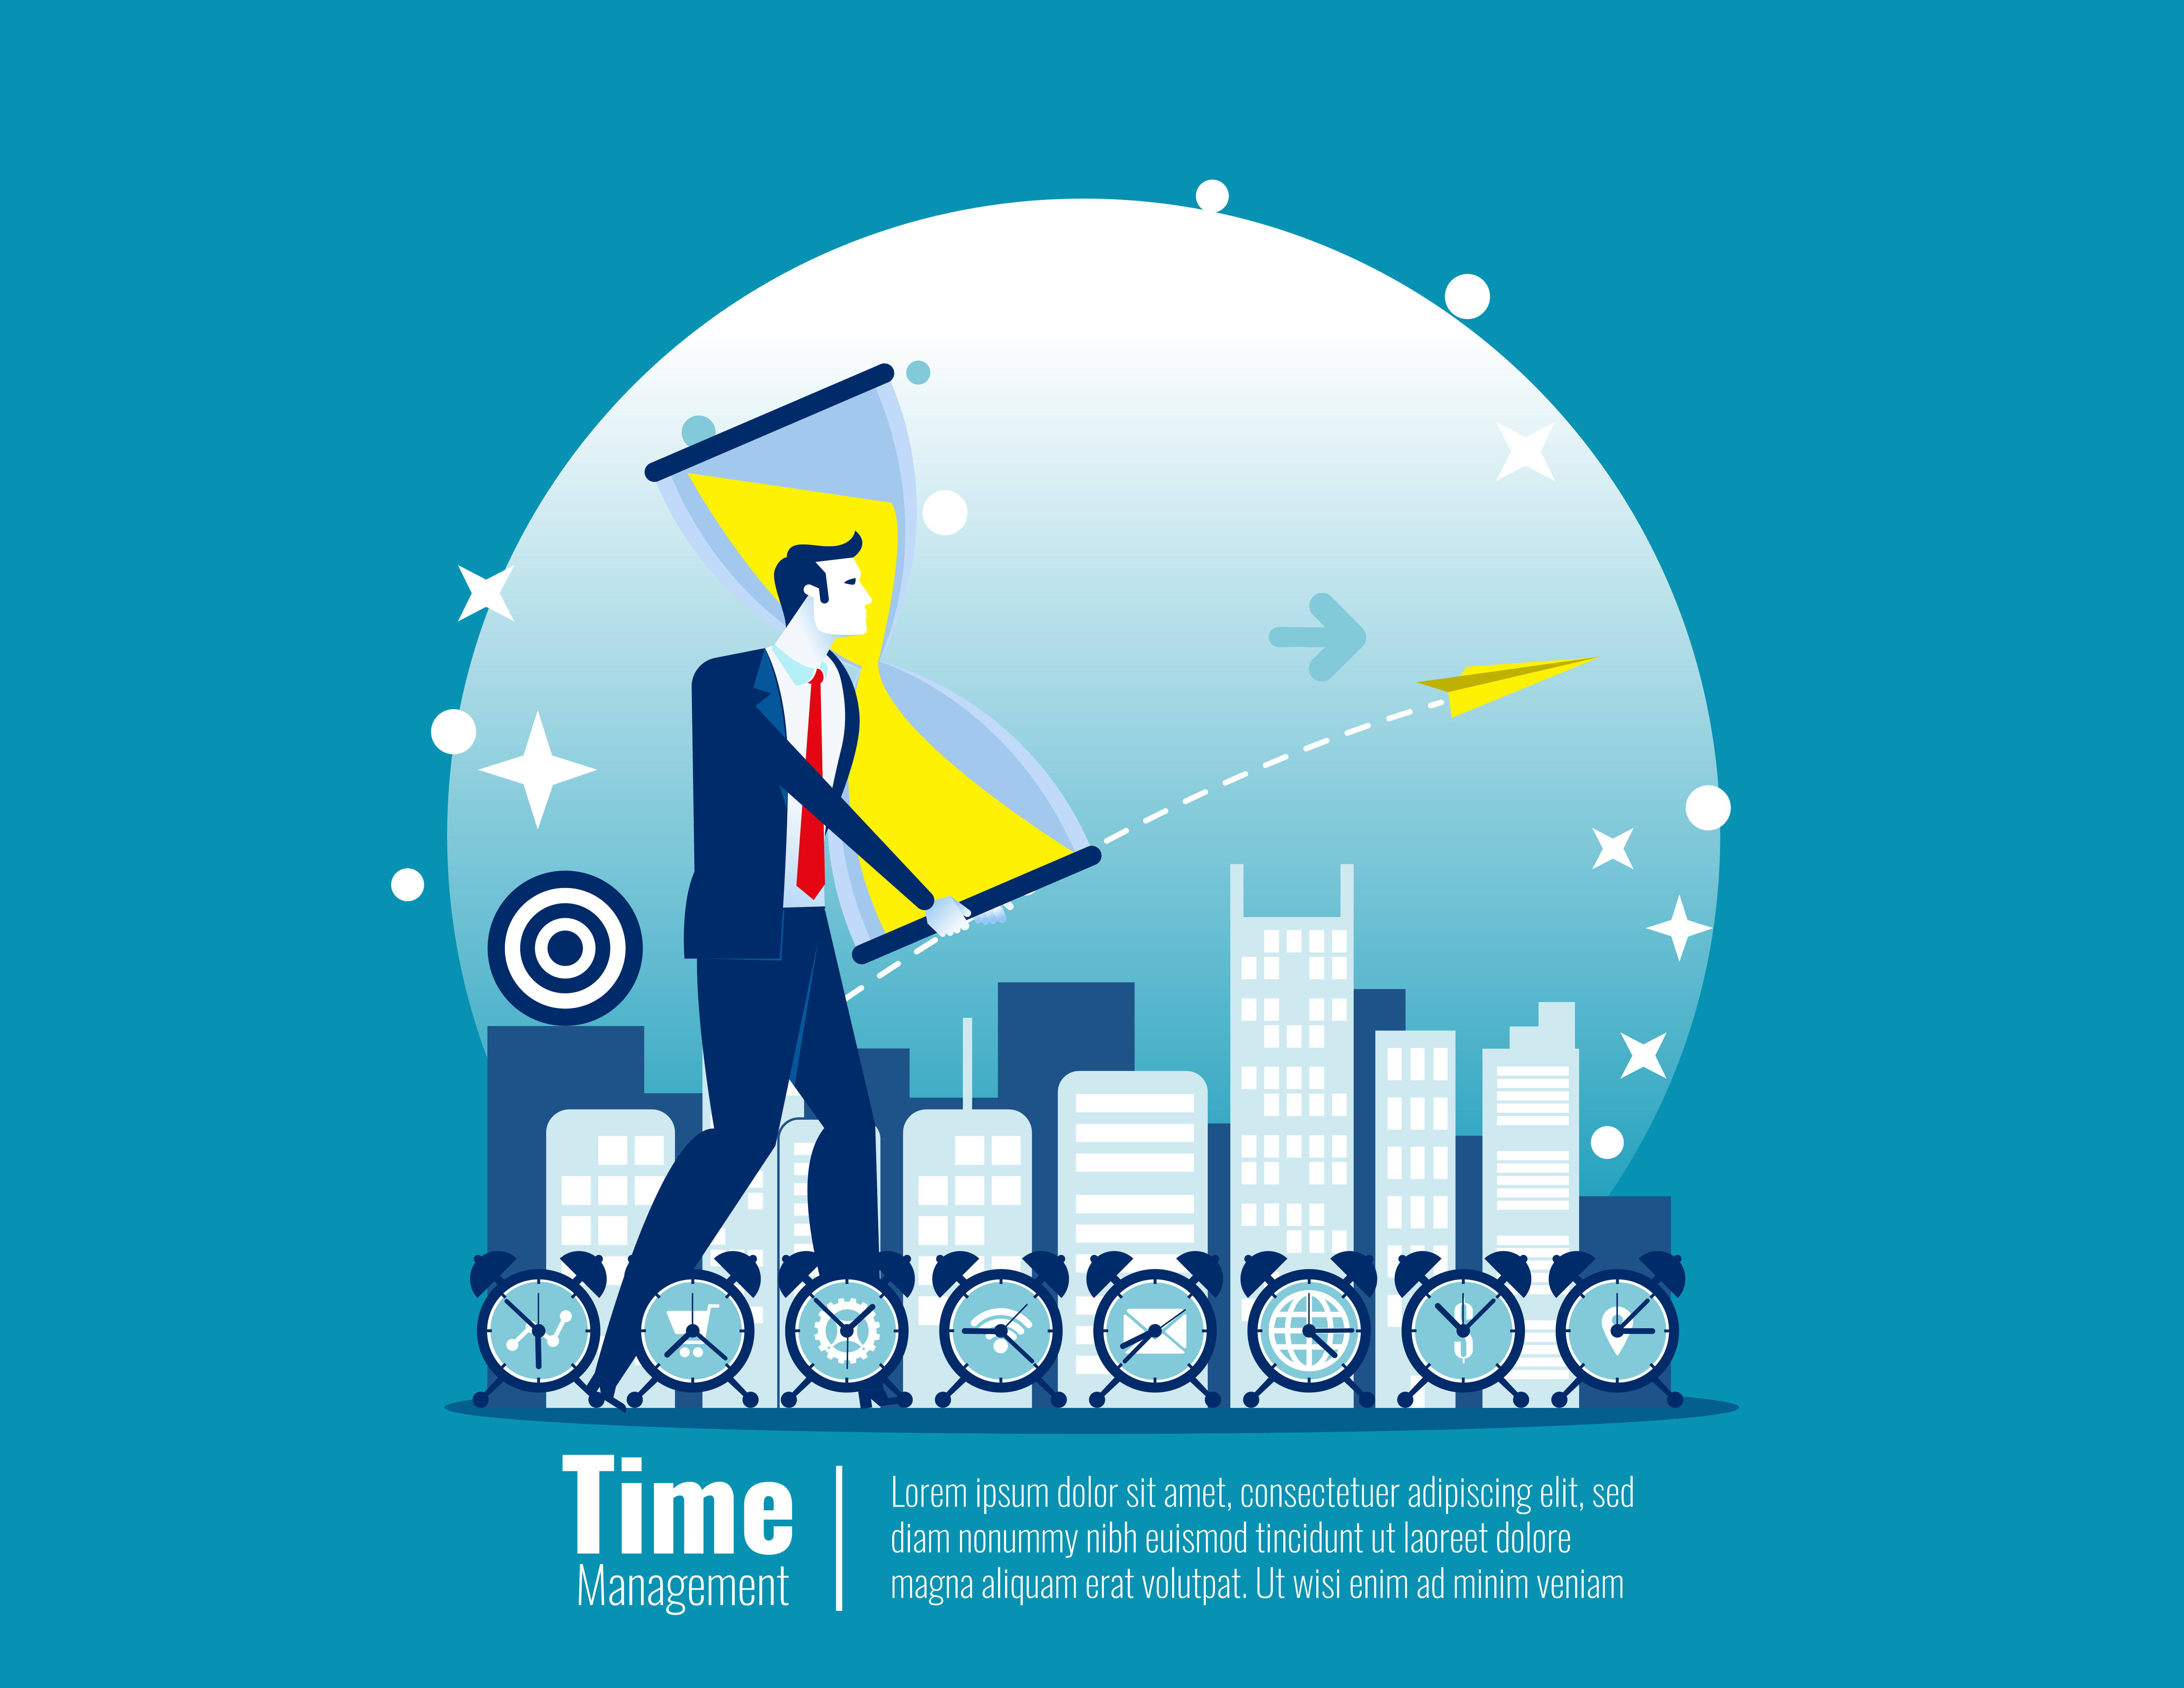 Business time management. Concept business vector illustration, Business solutions with clock, Planning and strategy.